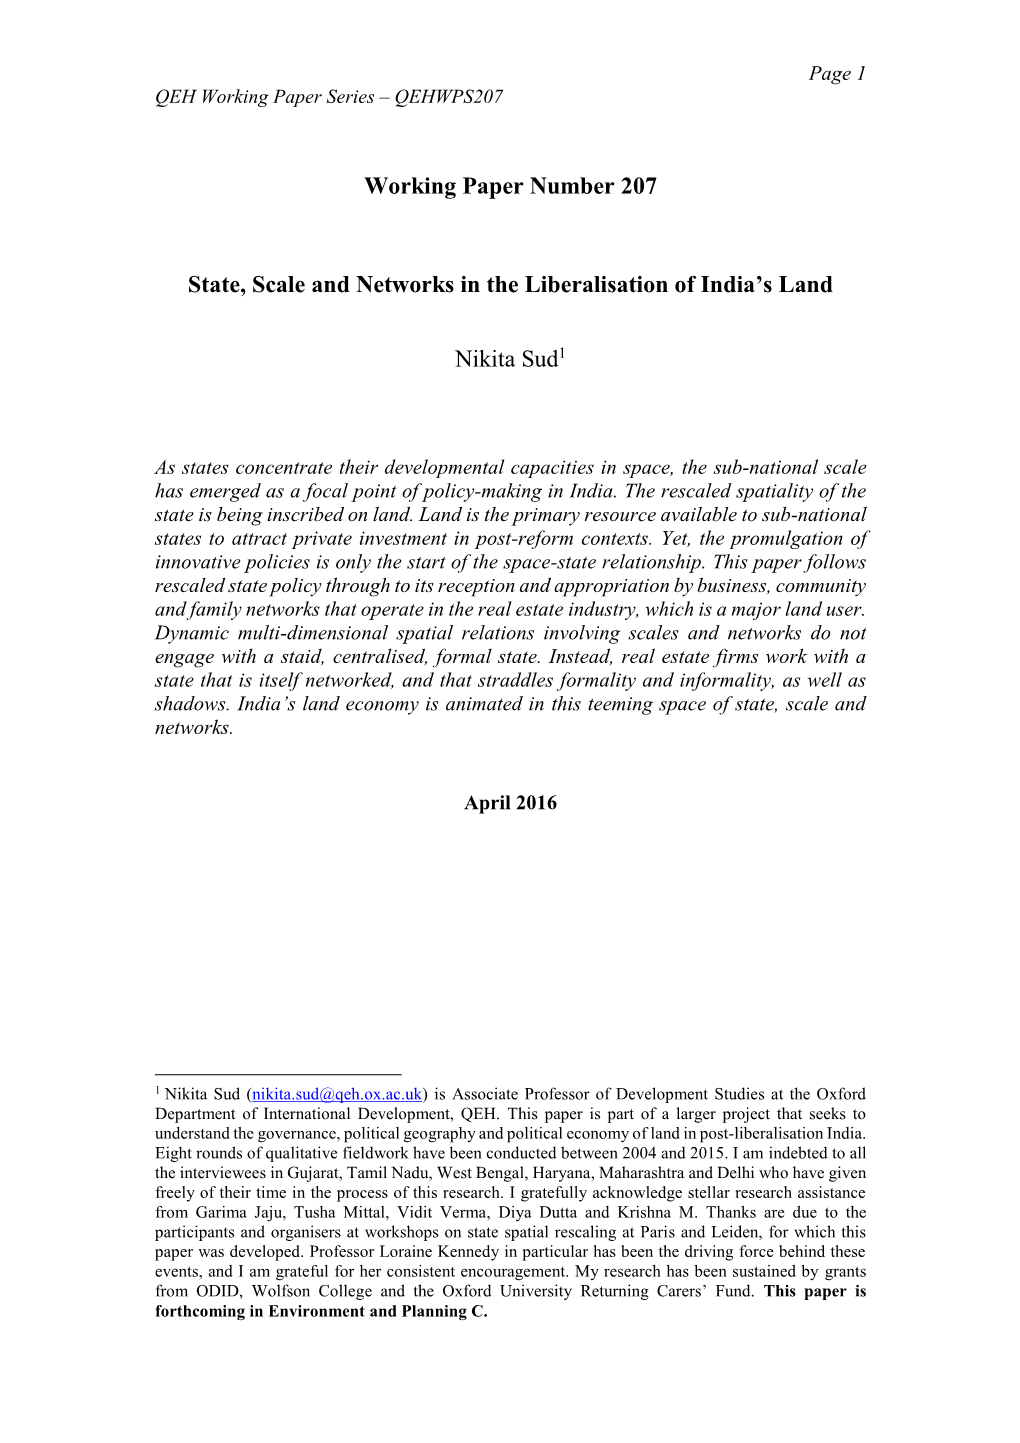 Working Paper Number 207 State, Scale and Networks in The